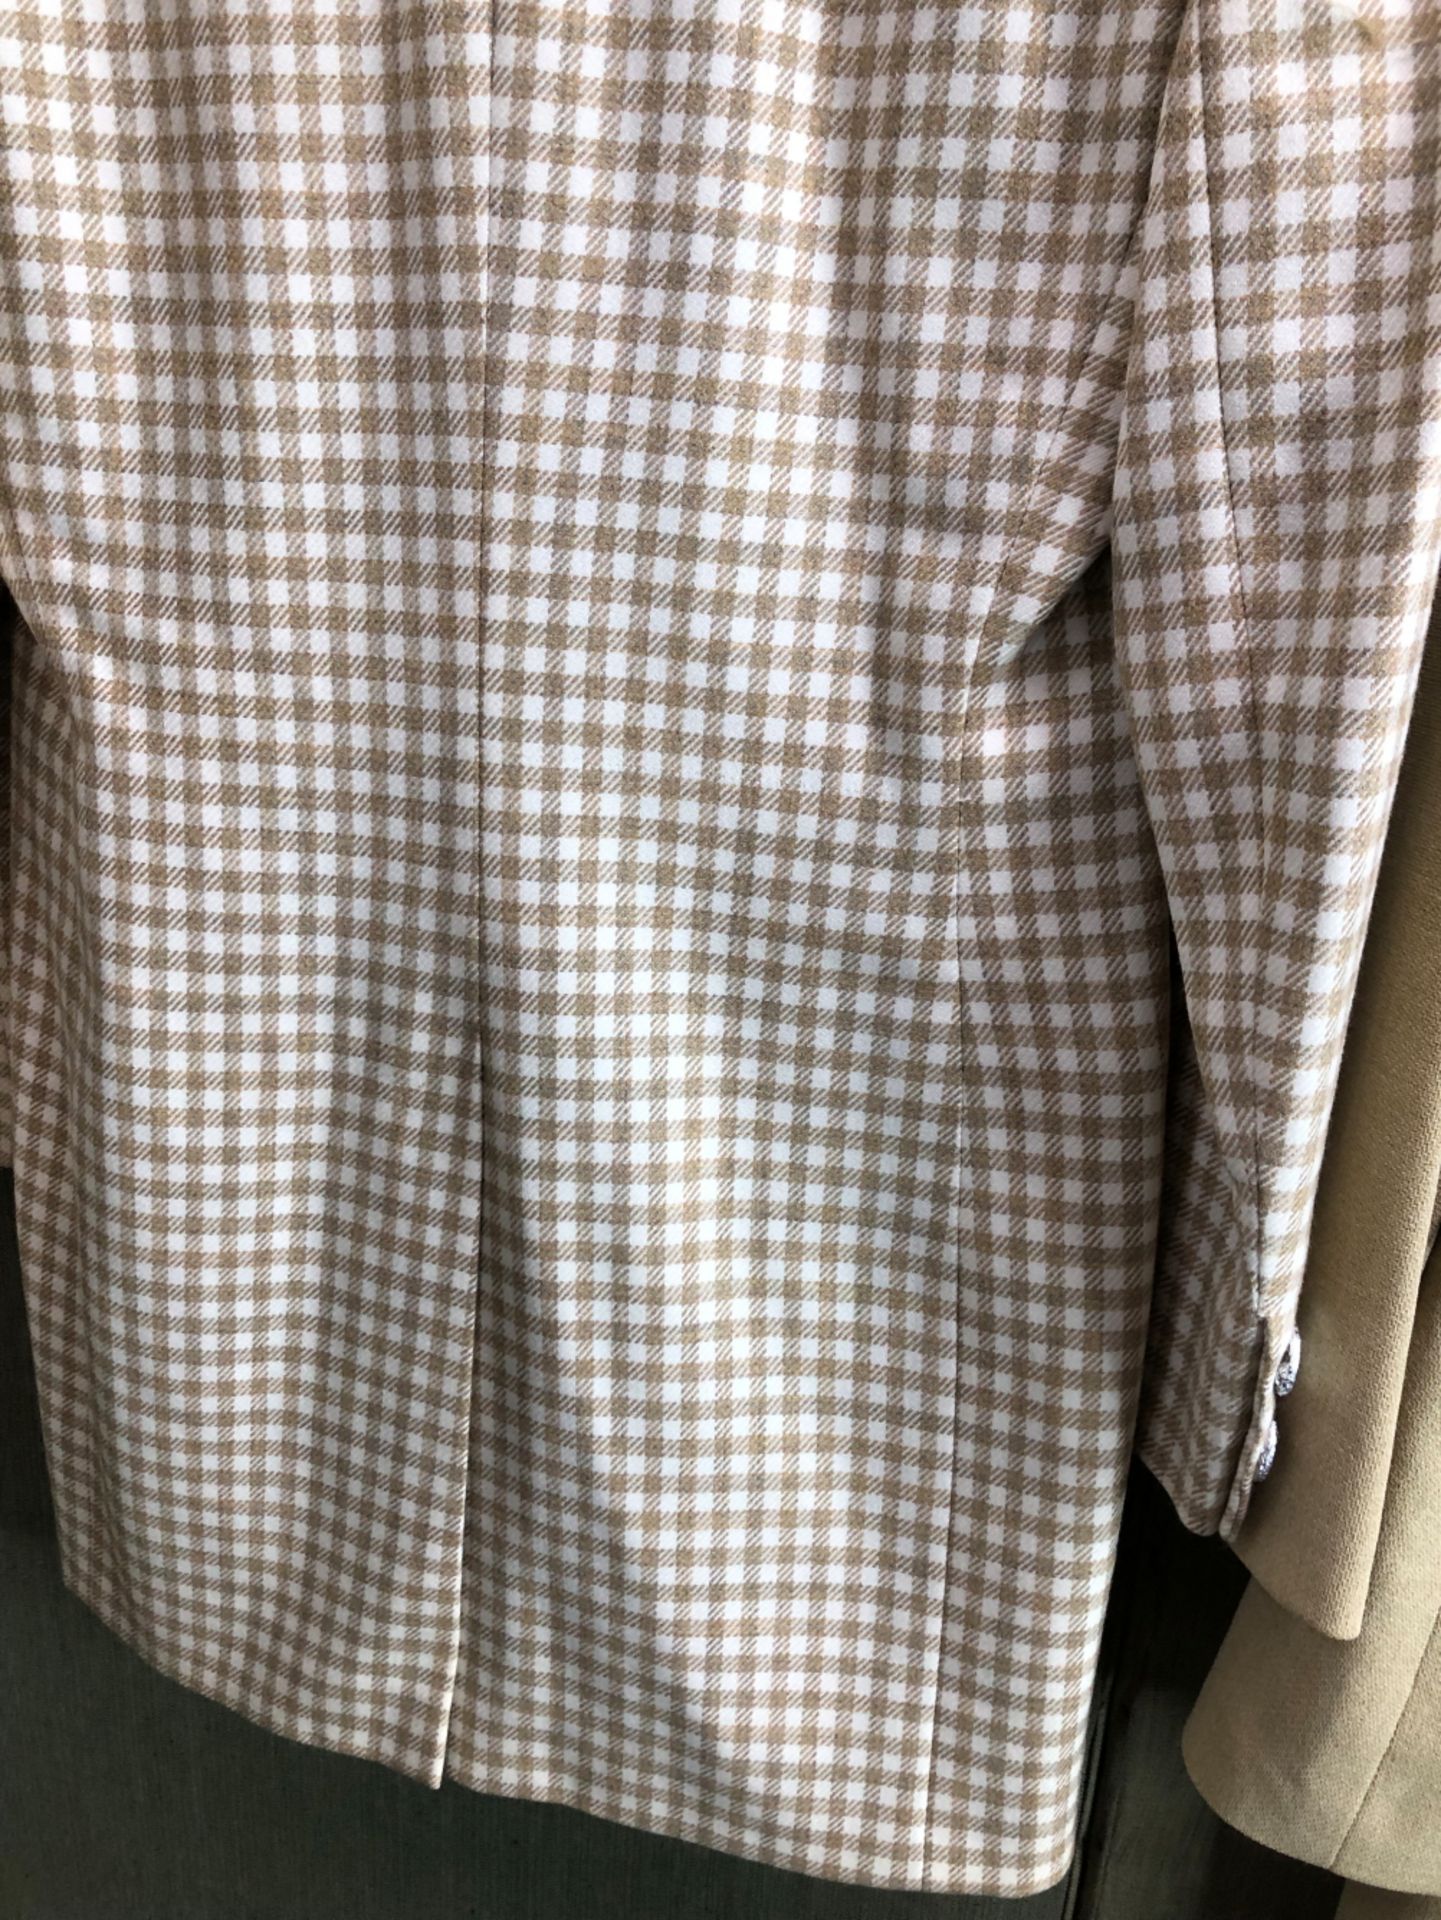 A AKRIS SWITZERLAND LADIES CREAM AND BEIGE CHECKED JACKET US SIZE 8 TOGETHER WITH A GILMAR ITALY - Image 6 of 11